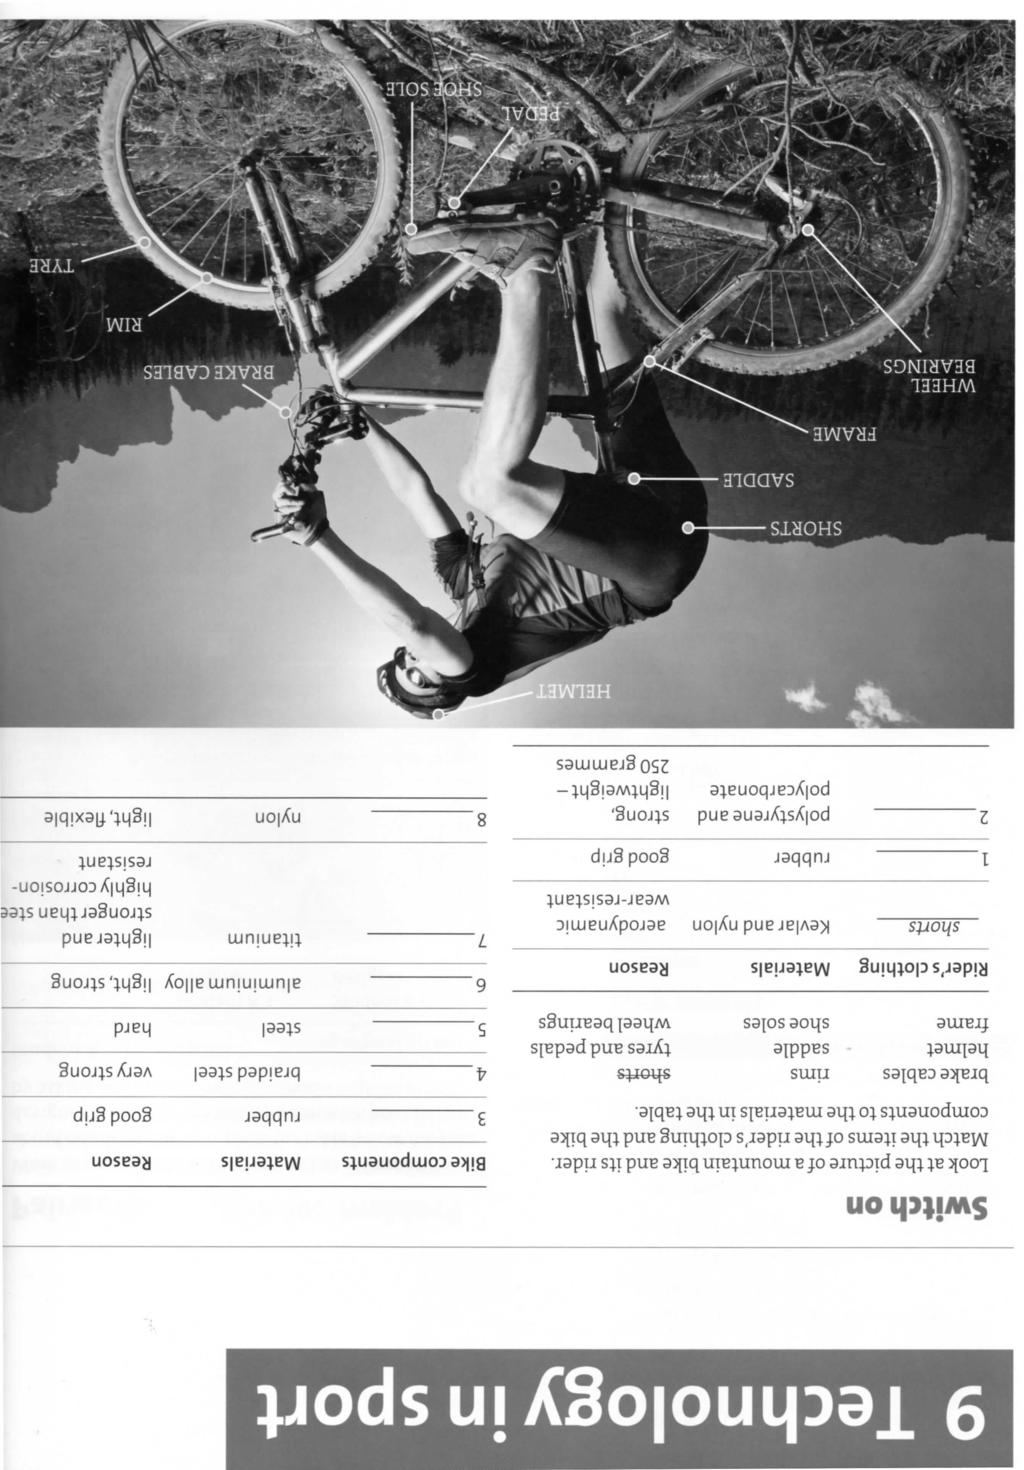 9 Technology in sport I Switch on Look at the picture of a mountain bike and its rider. Match the items of the rider's clothing and the bike components to the materials in the table.